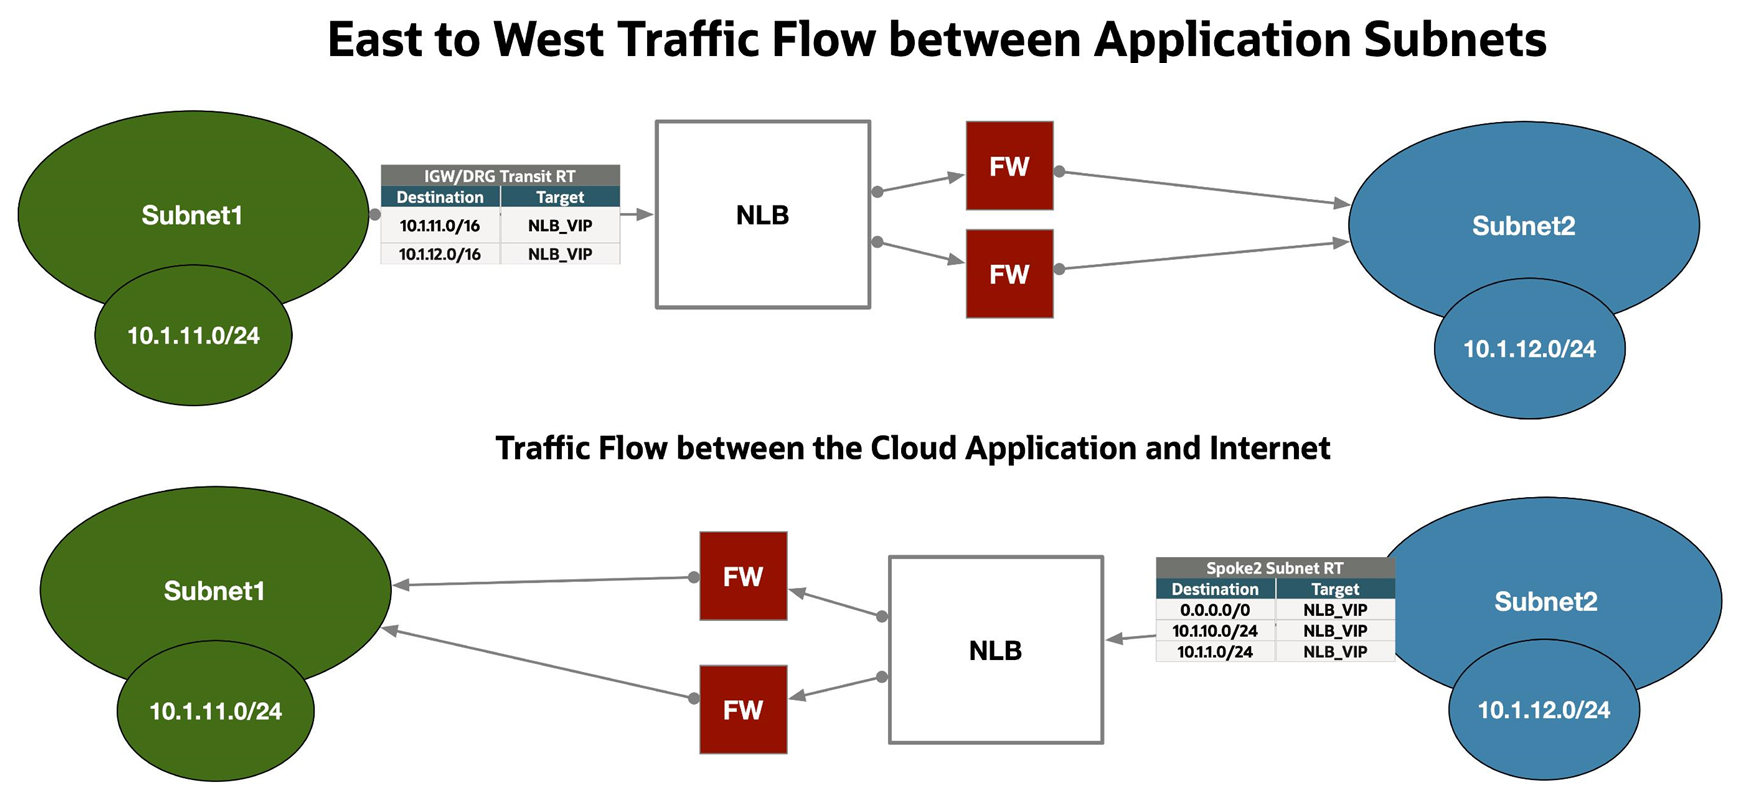 East to West Flow between Application Subnets